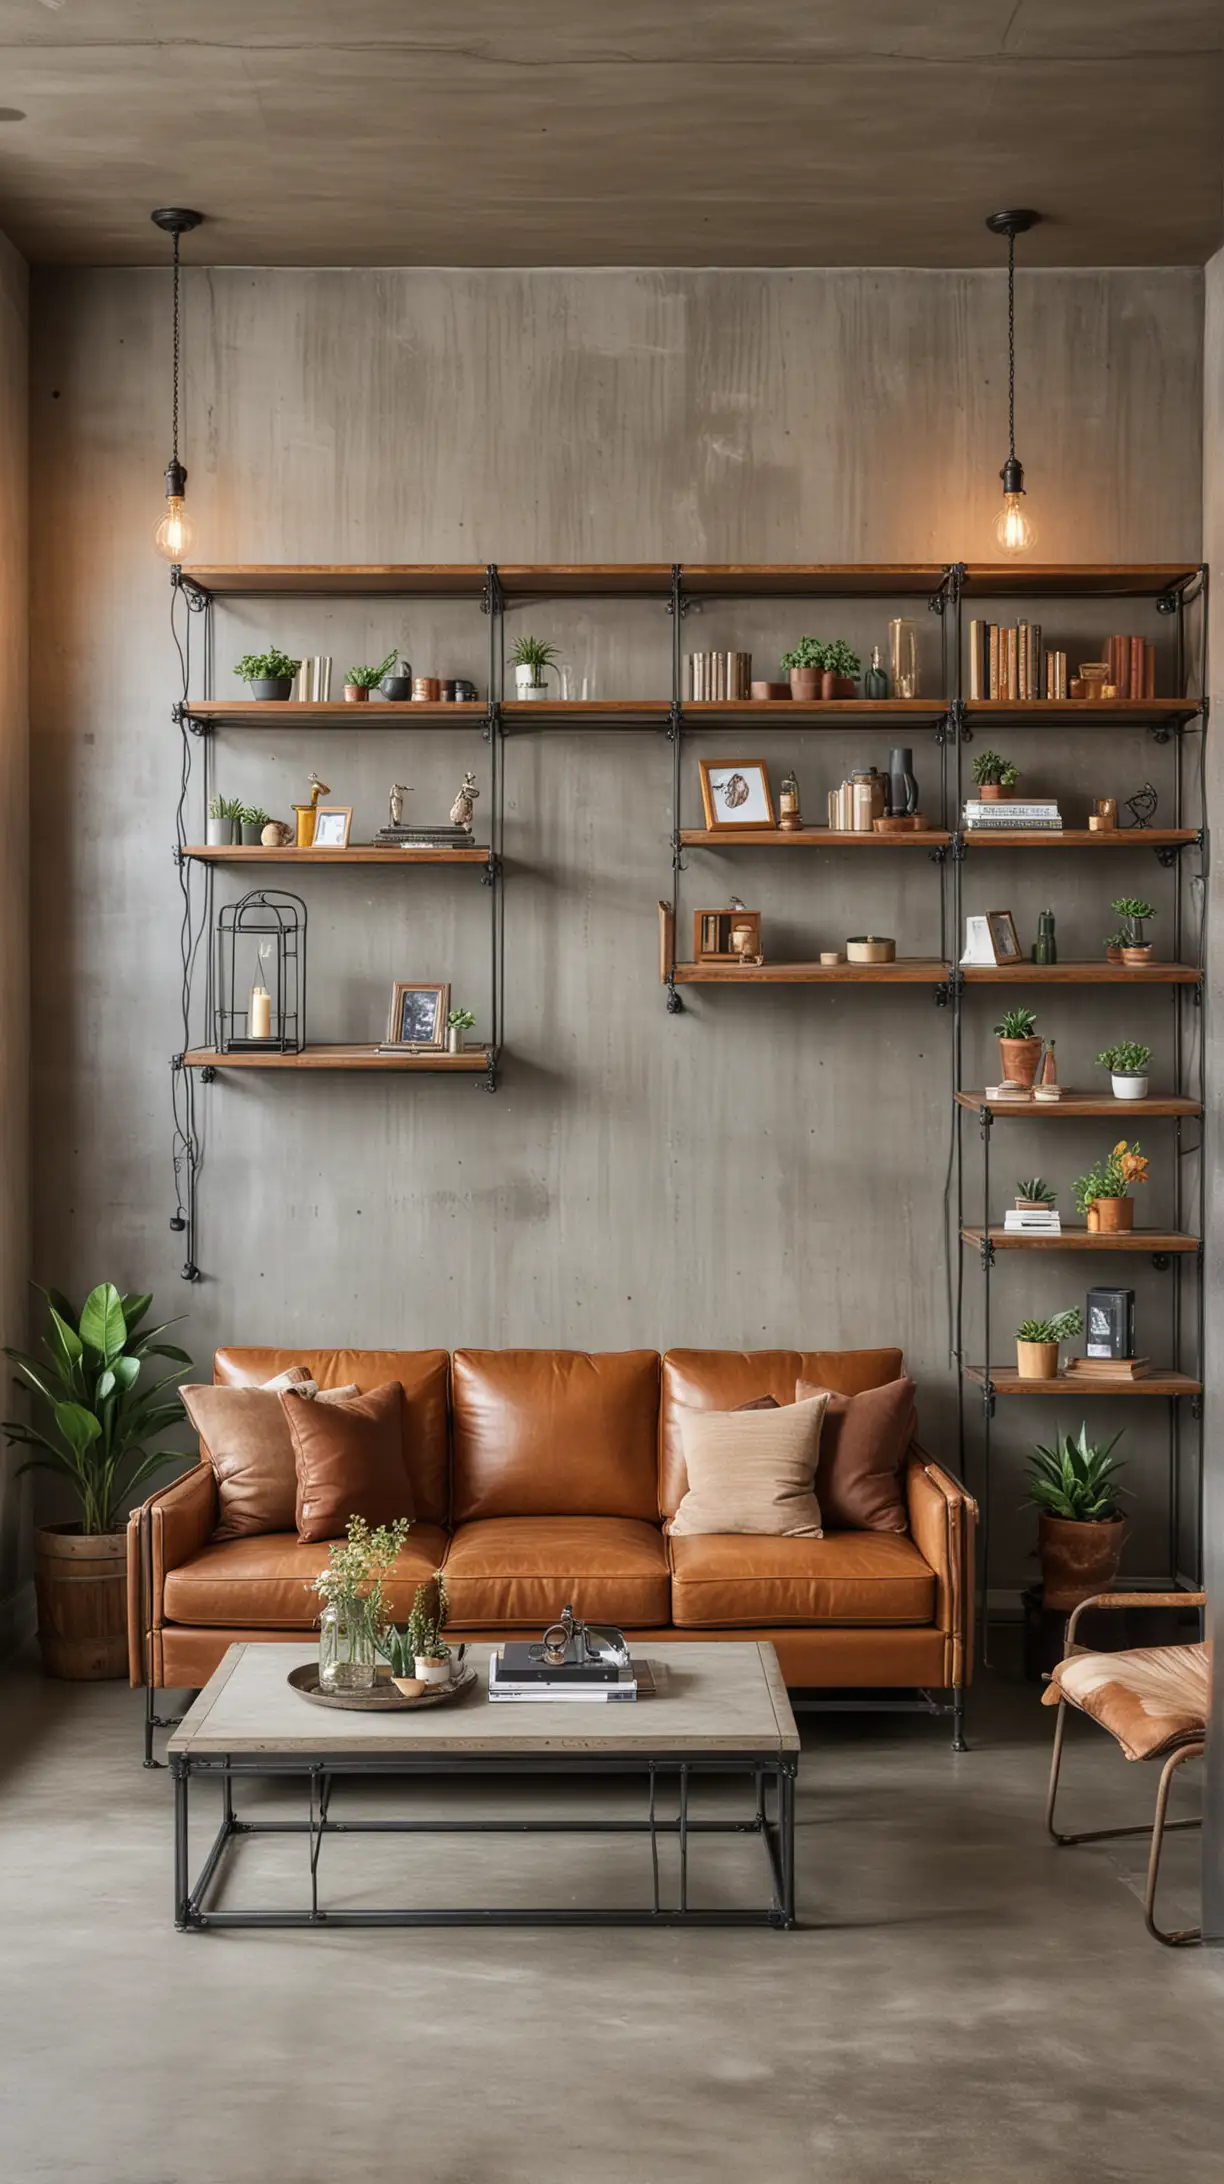 An industrial-style living room with a tan leather couch, metal shelving units, exposed piping, concrete flooring, and Edison bulb lighting.